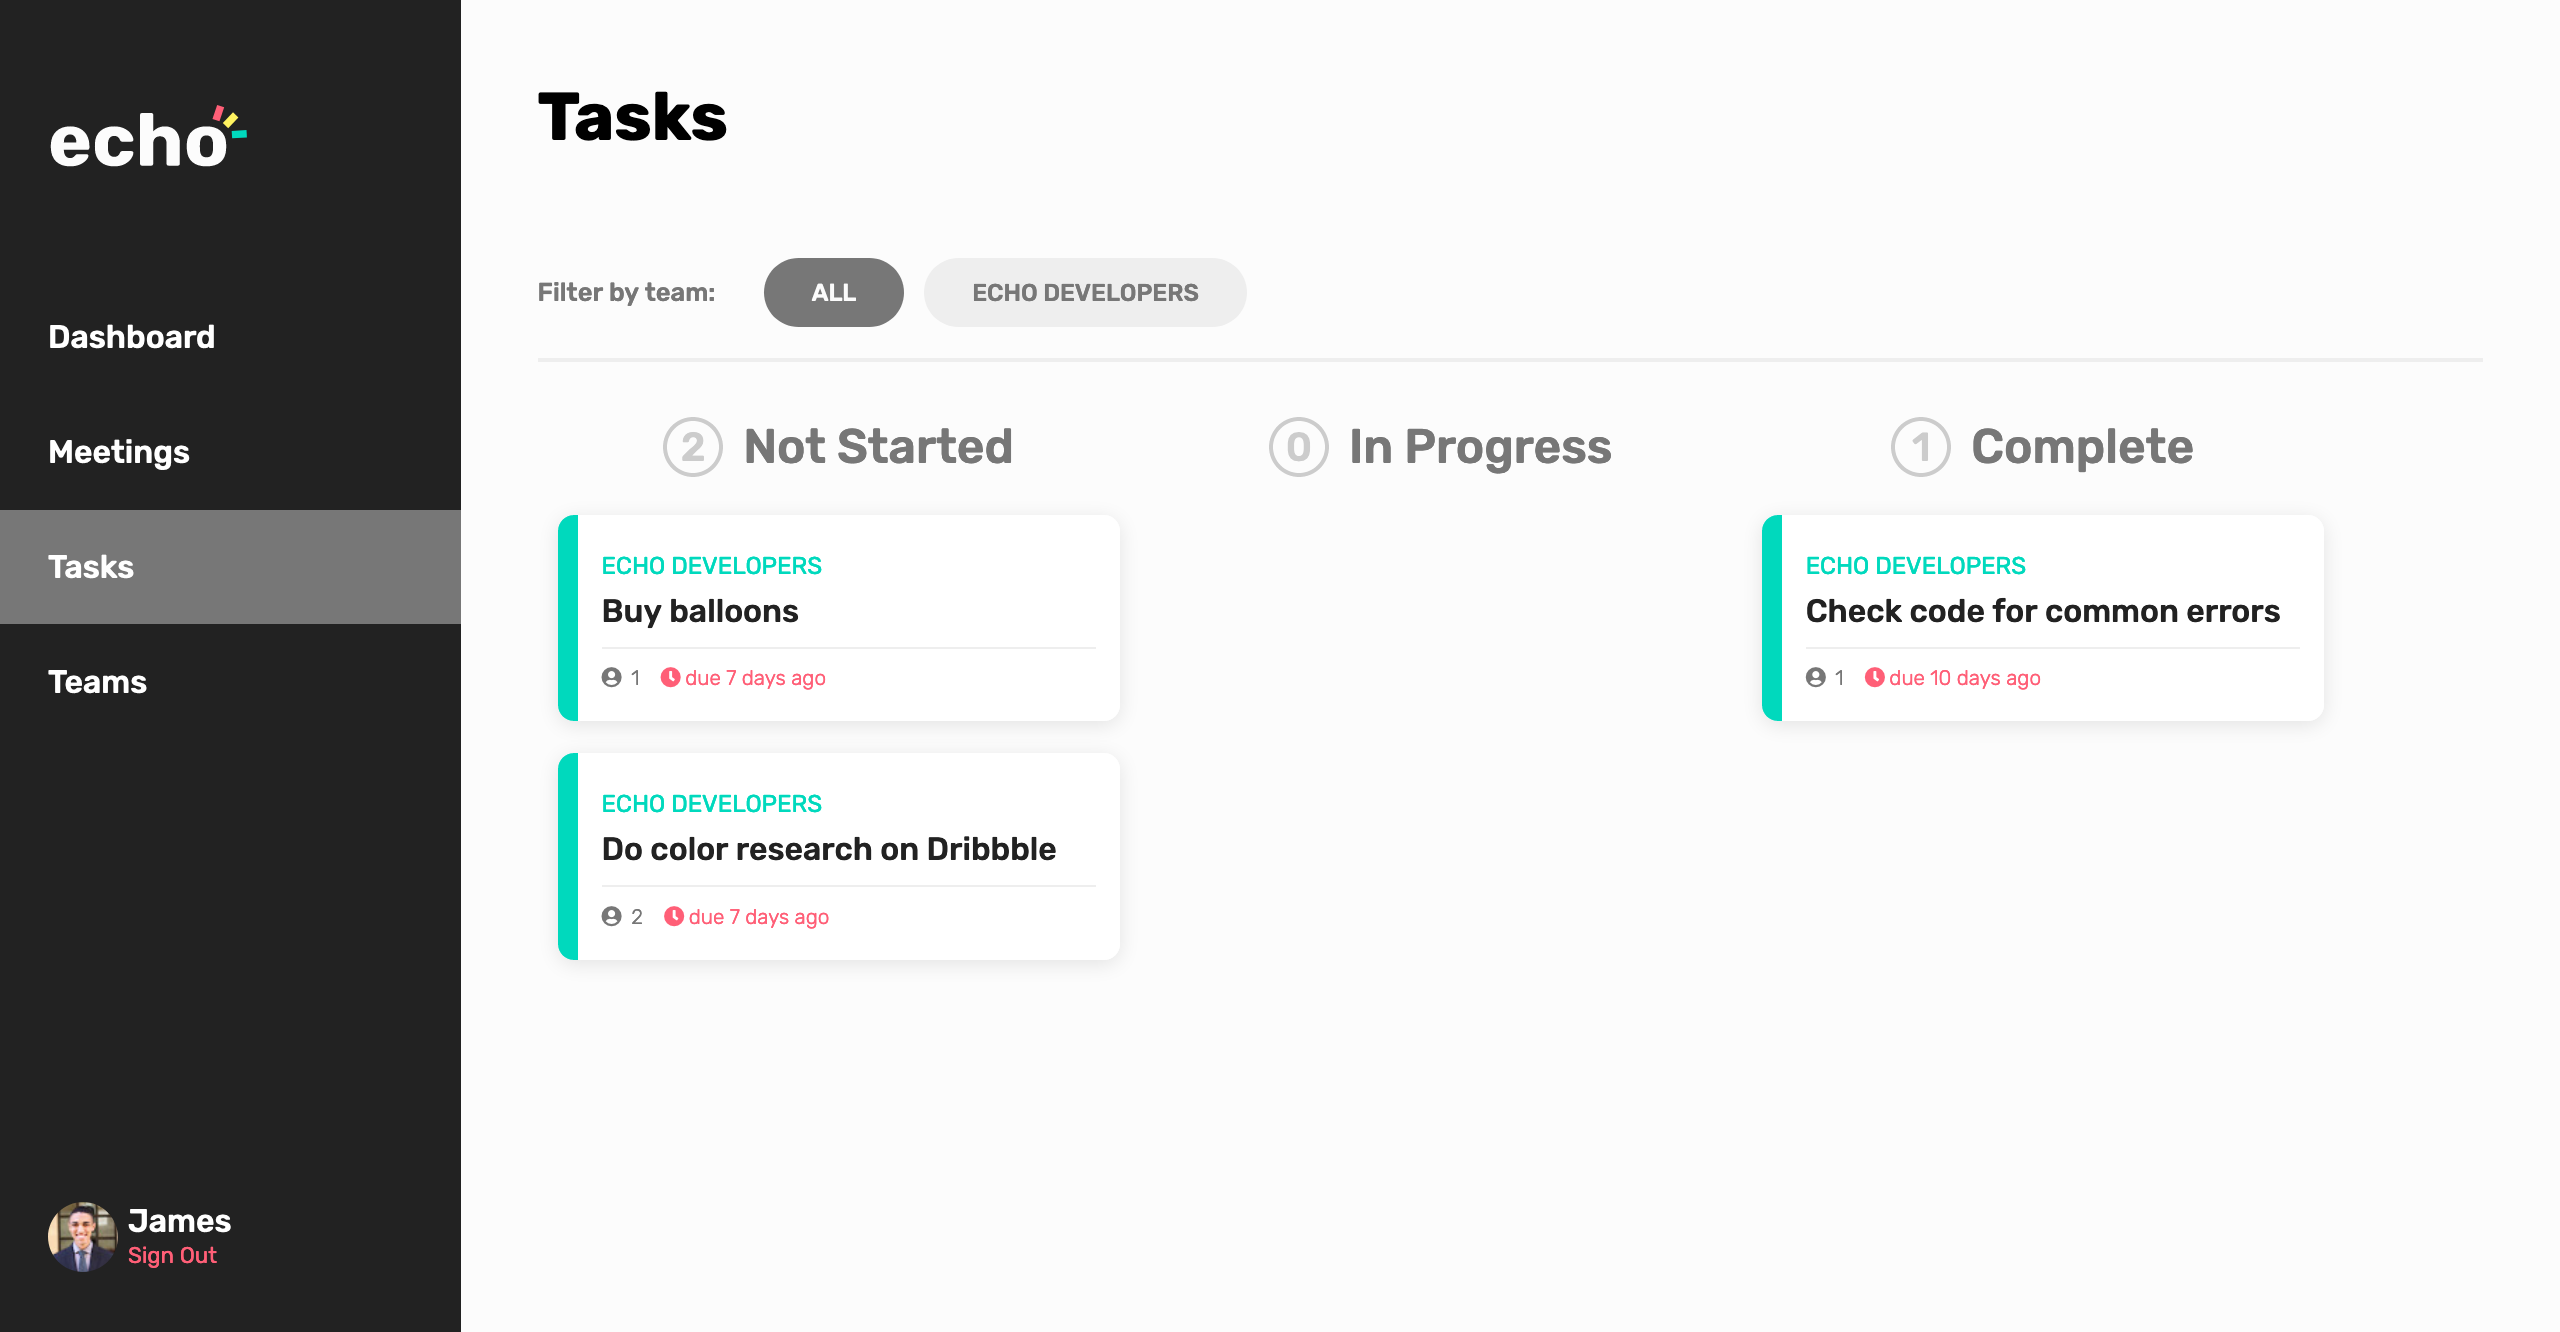 The tasks screen in echo, showing a kanban view of the user’s tasks.